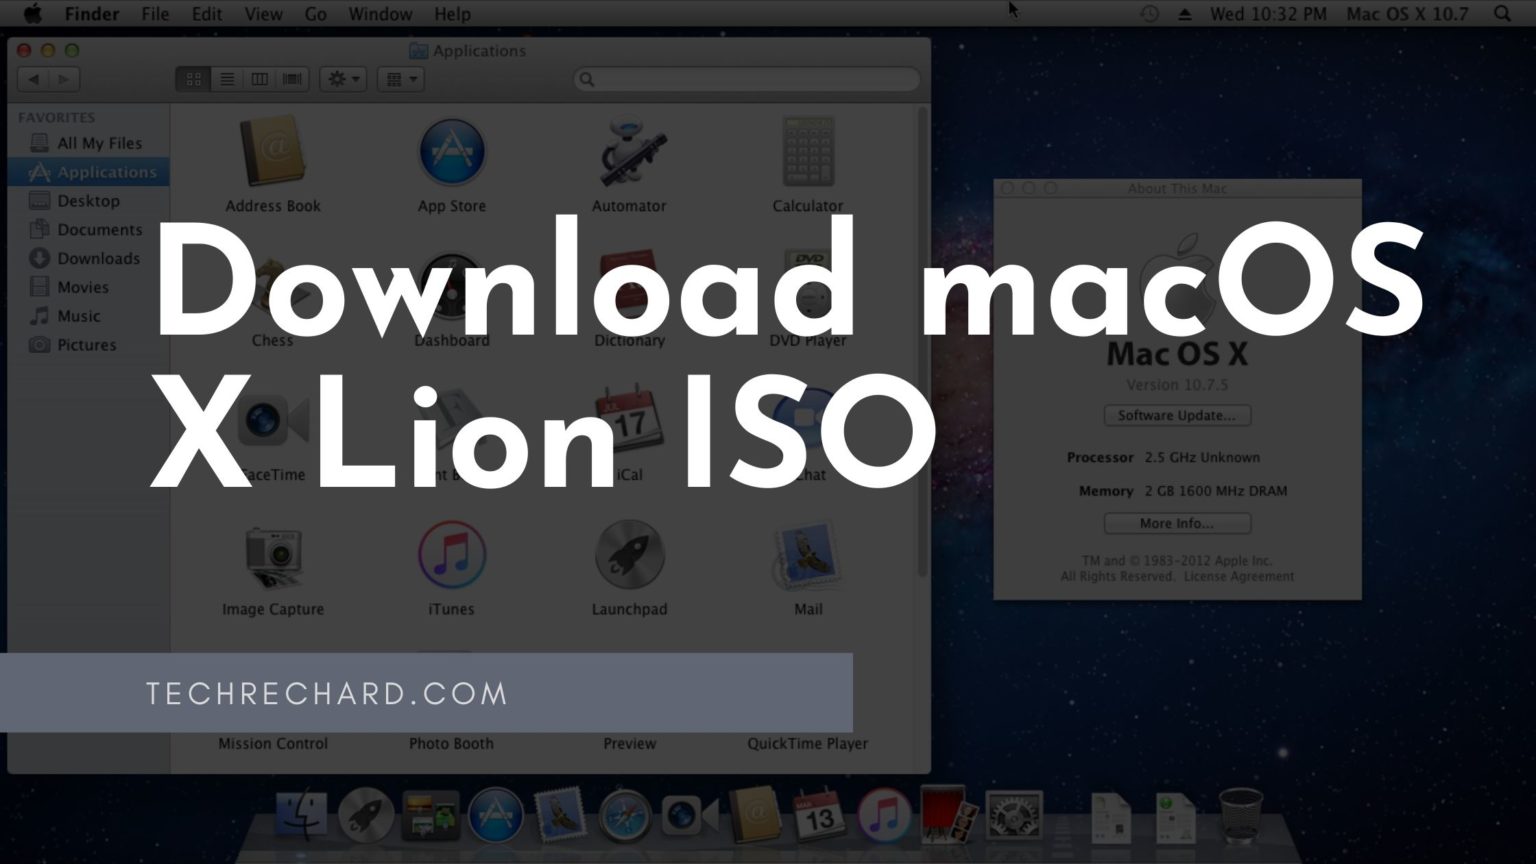 macos x lion iso